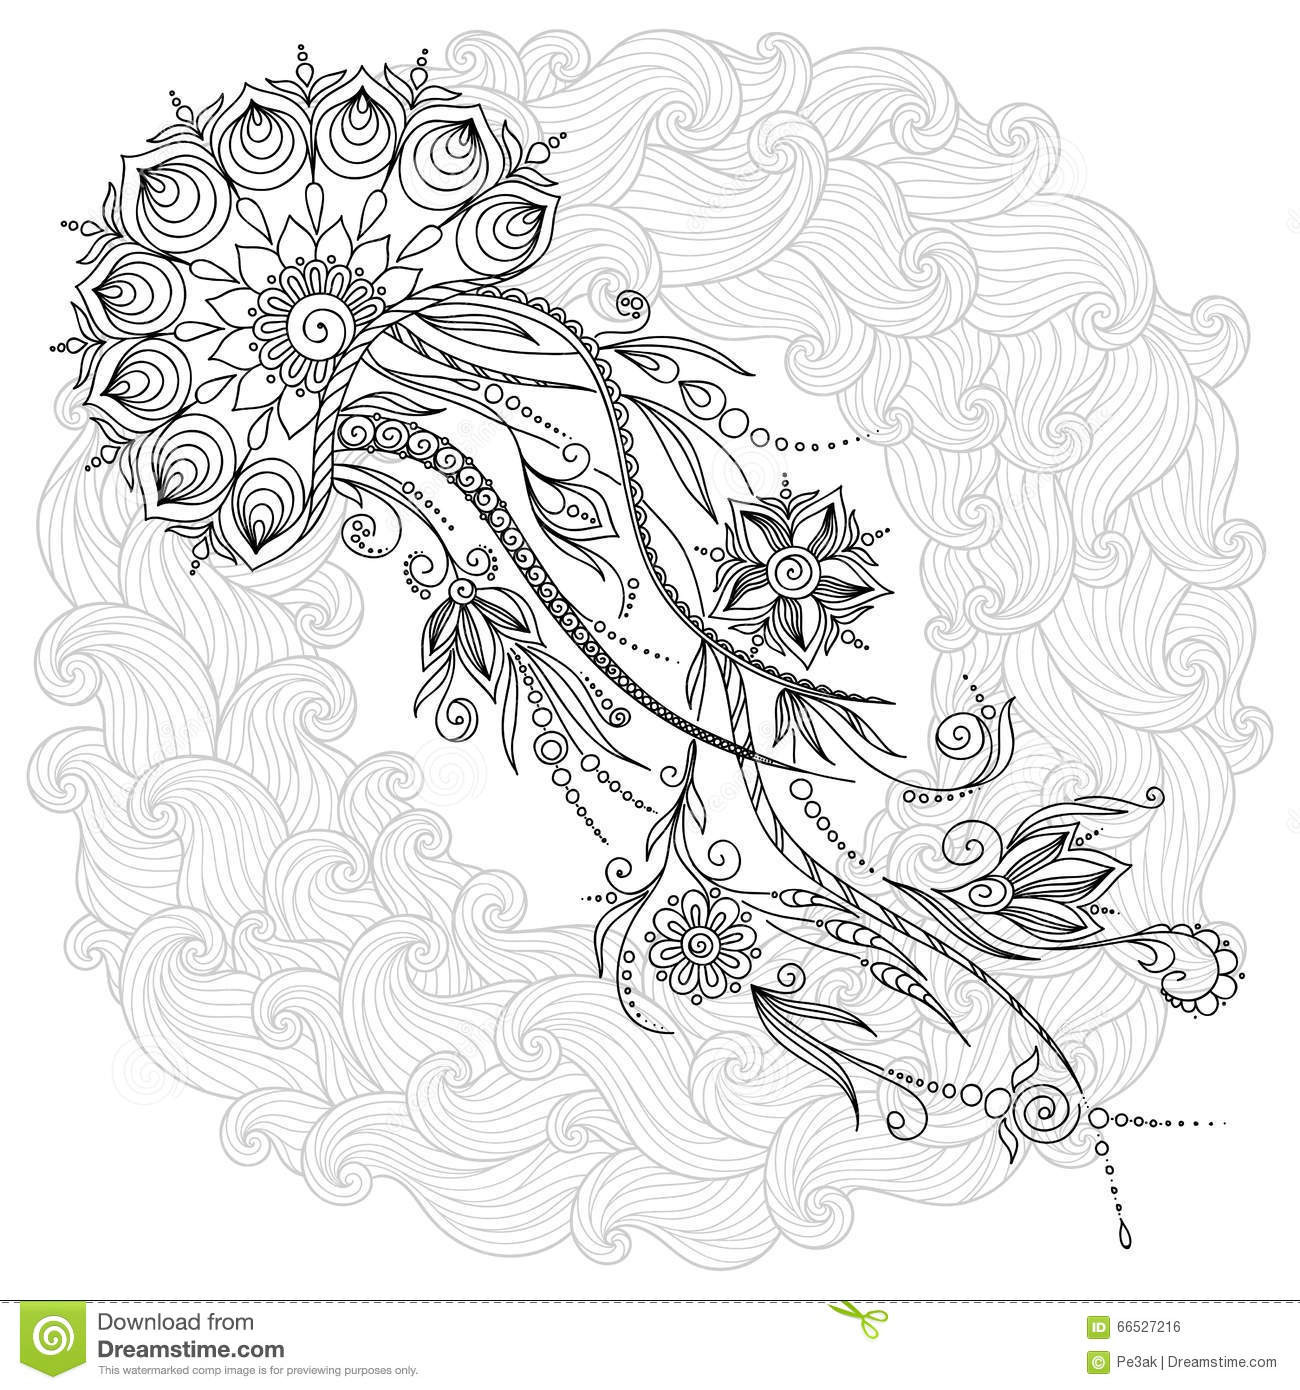 Jellyfish Coloring Pages For Adults
 Pattern For Coloring Book Jellyfish In Vector Stock